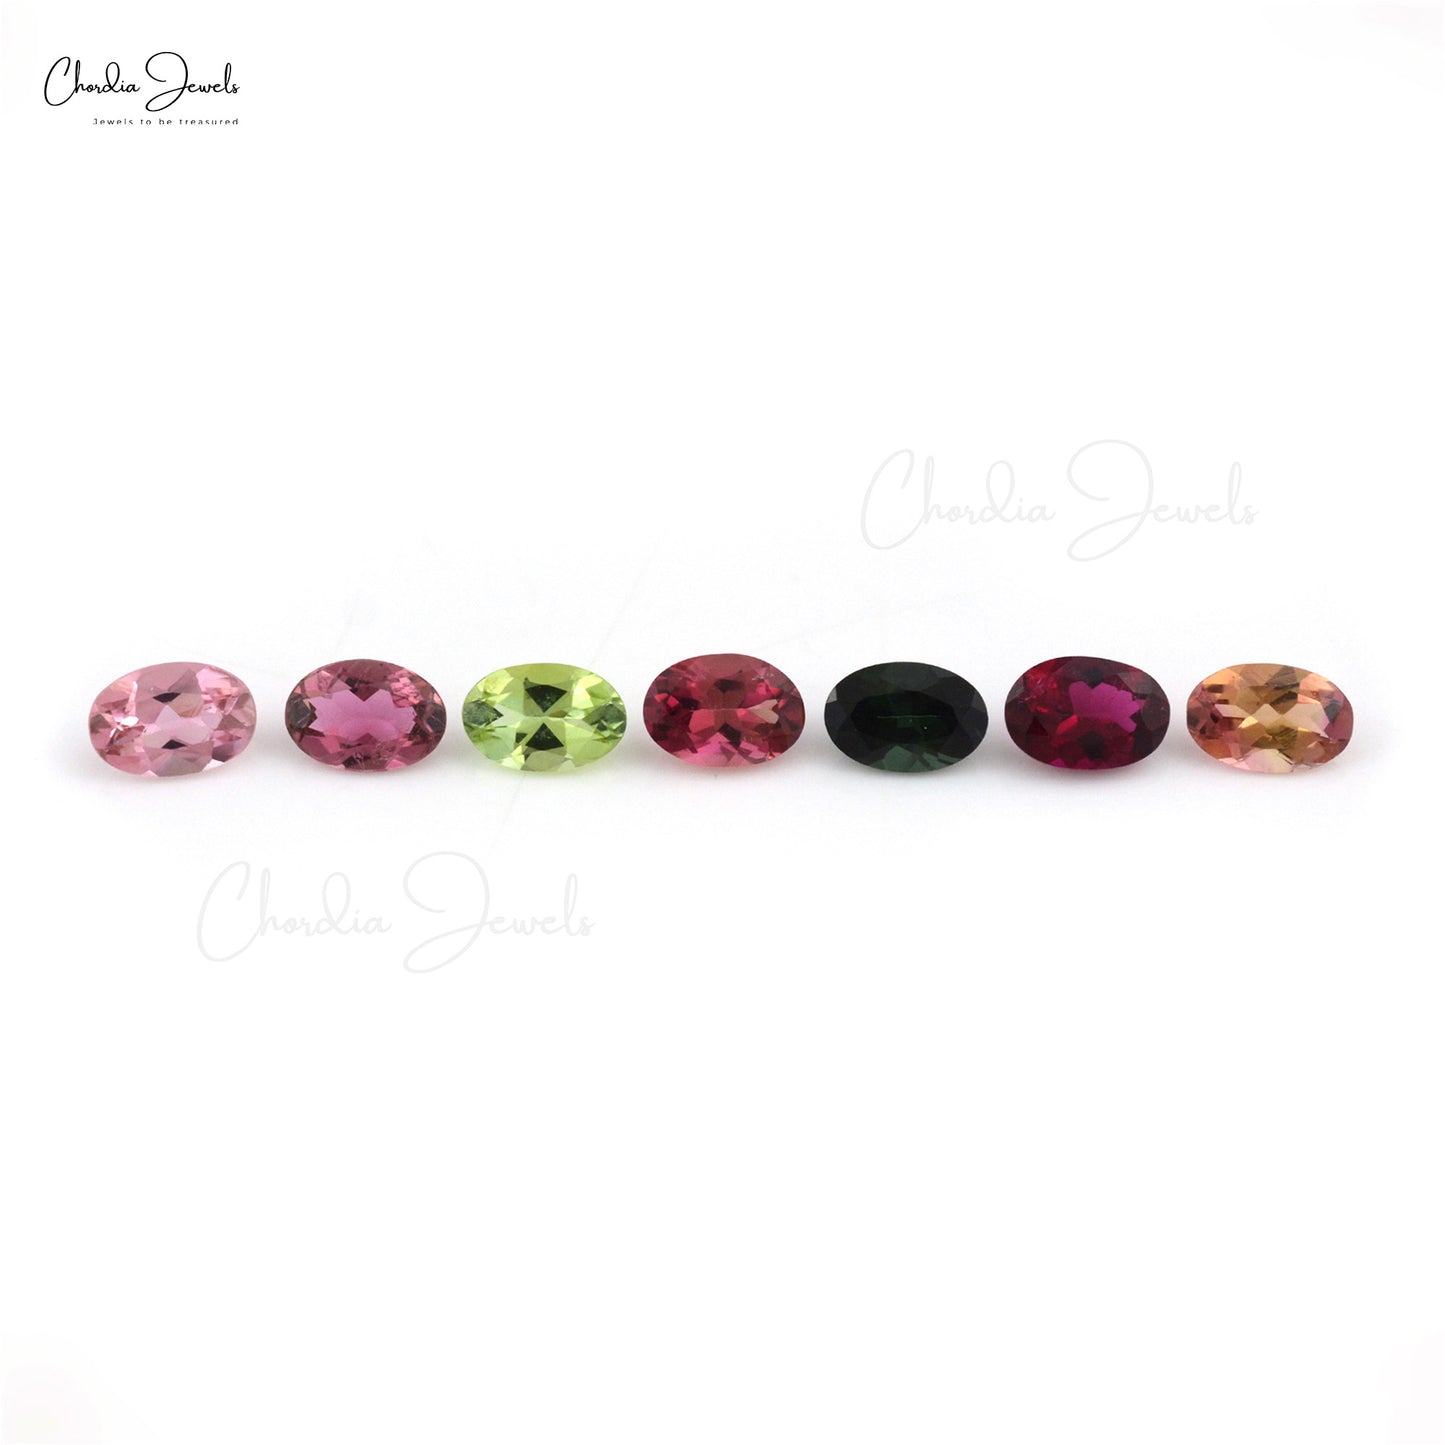 Load image into Gallery viewer, 1/2 Carats Multi Tourmaline Oval Cut 6x4mm Loose Gemstone For Jewelry, 1 Piece
